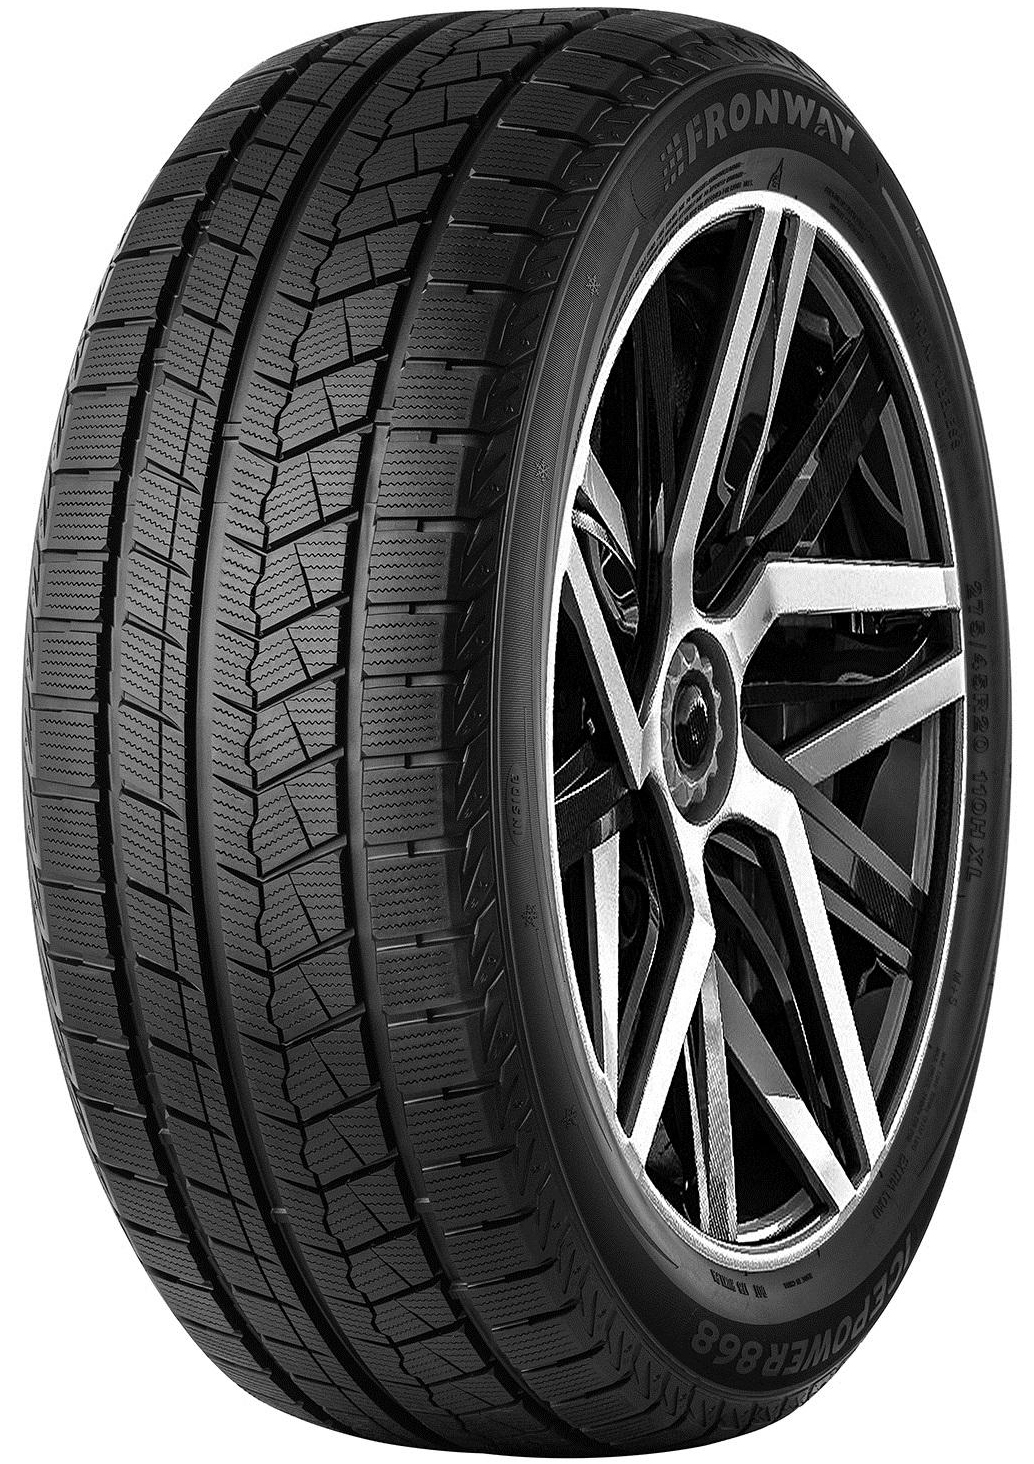    Fronway Icepower 868 275/60 R20 